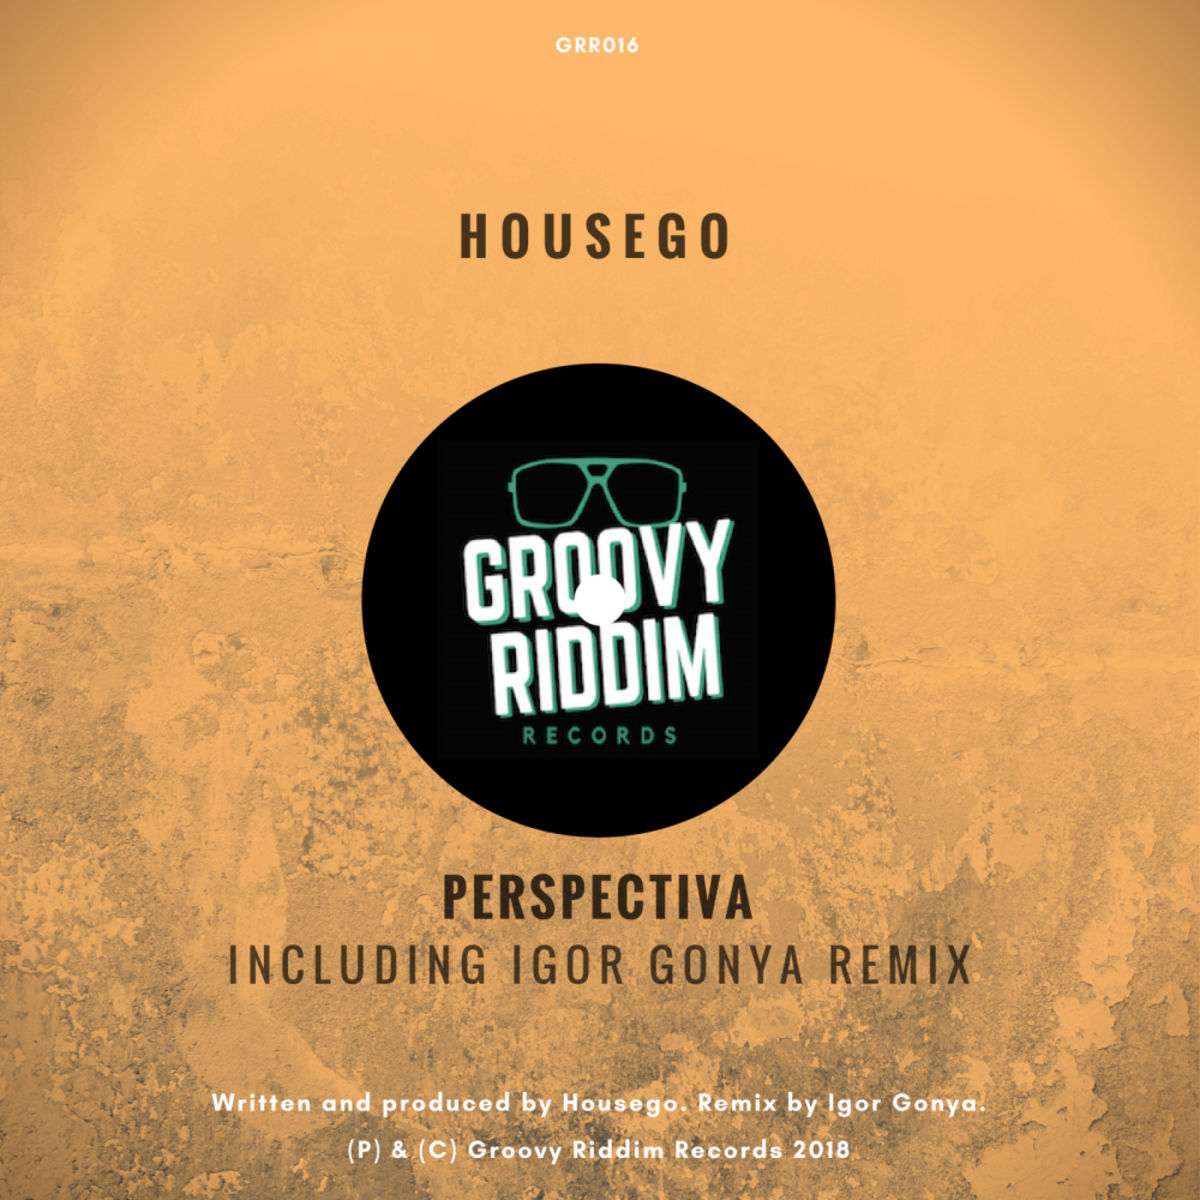 Housego - Perspectiva / Groovy Riddim Records